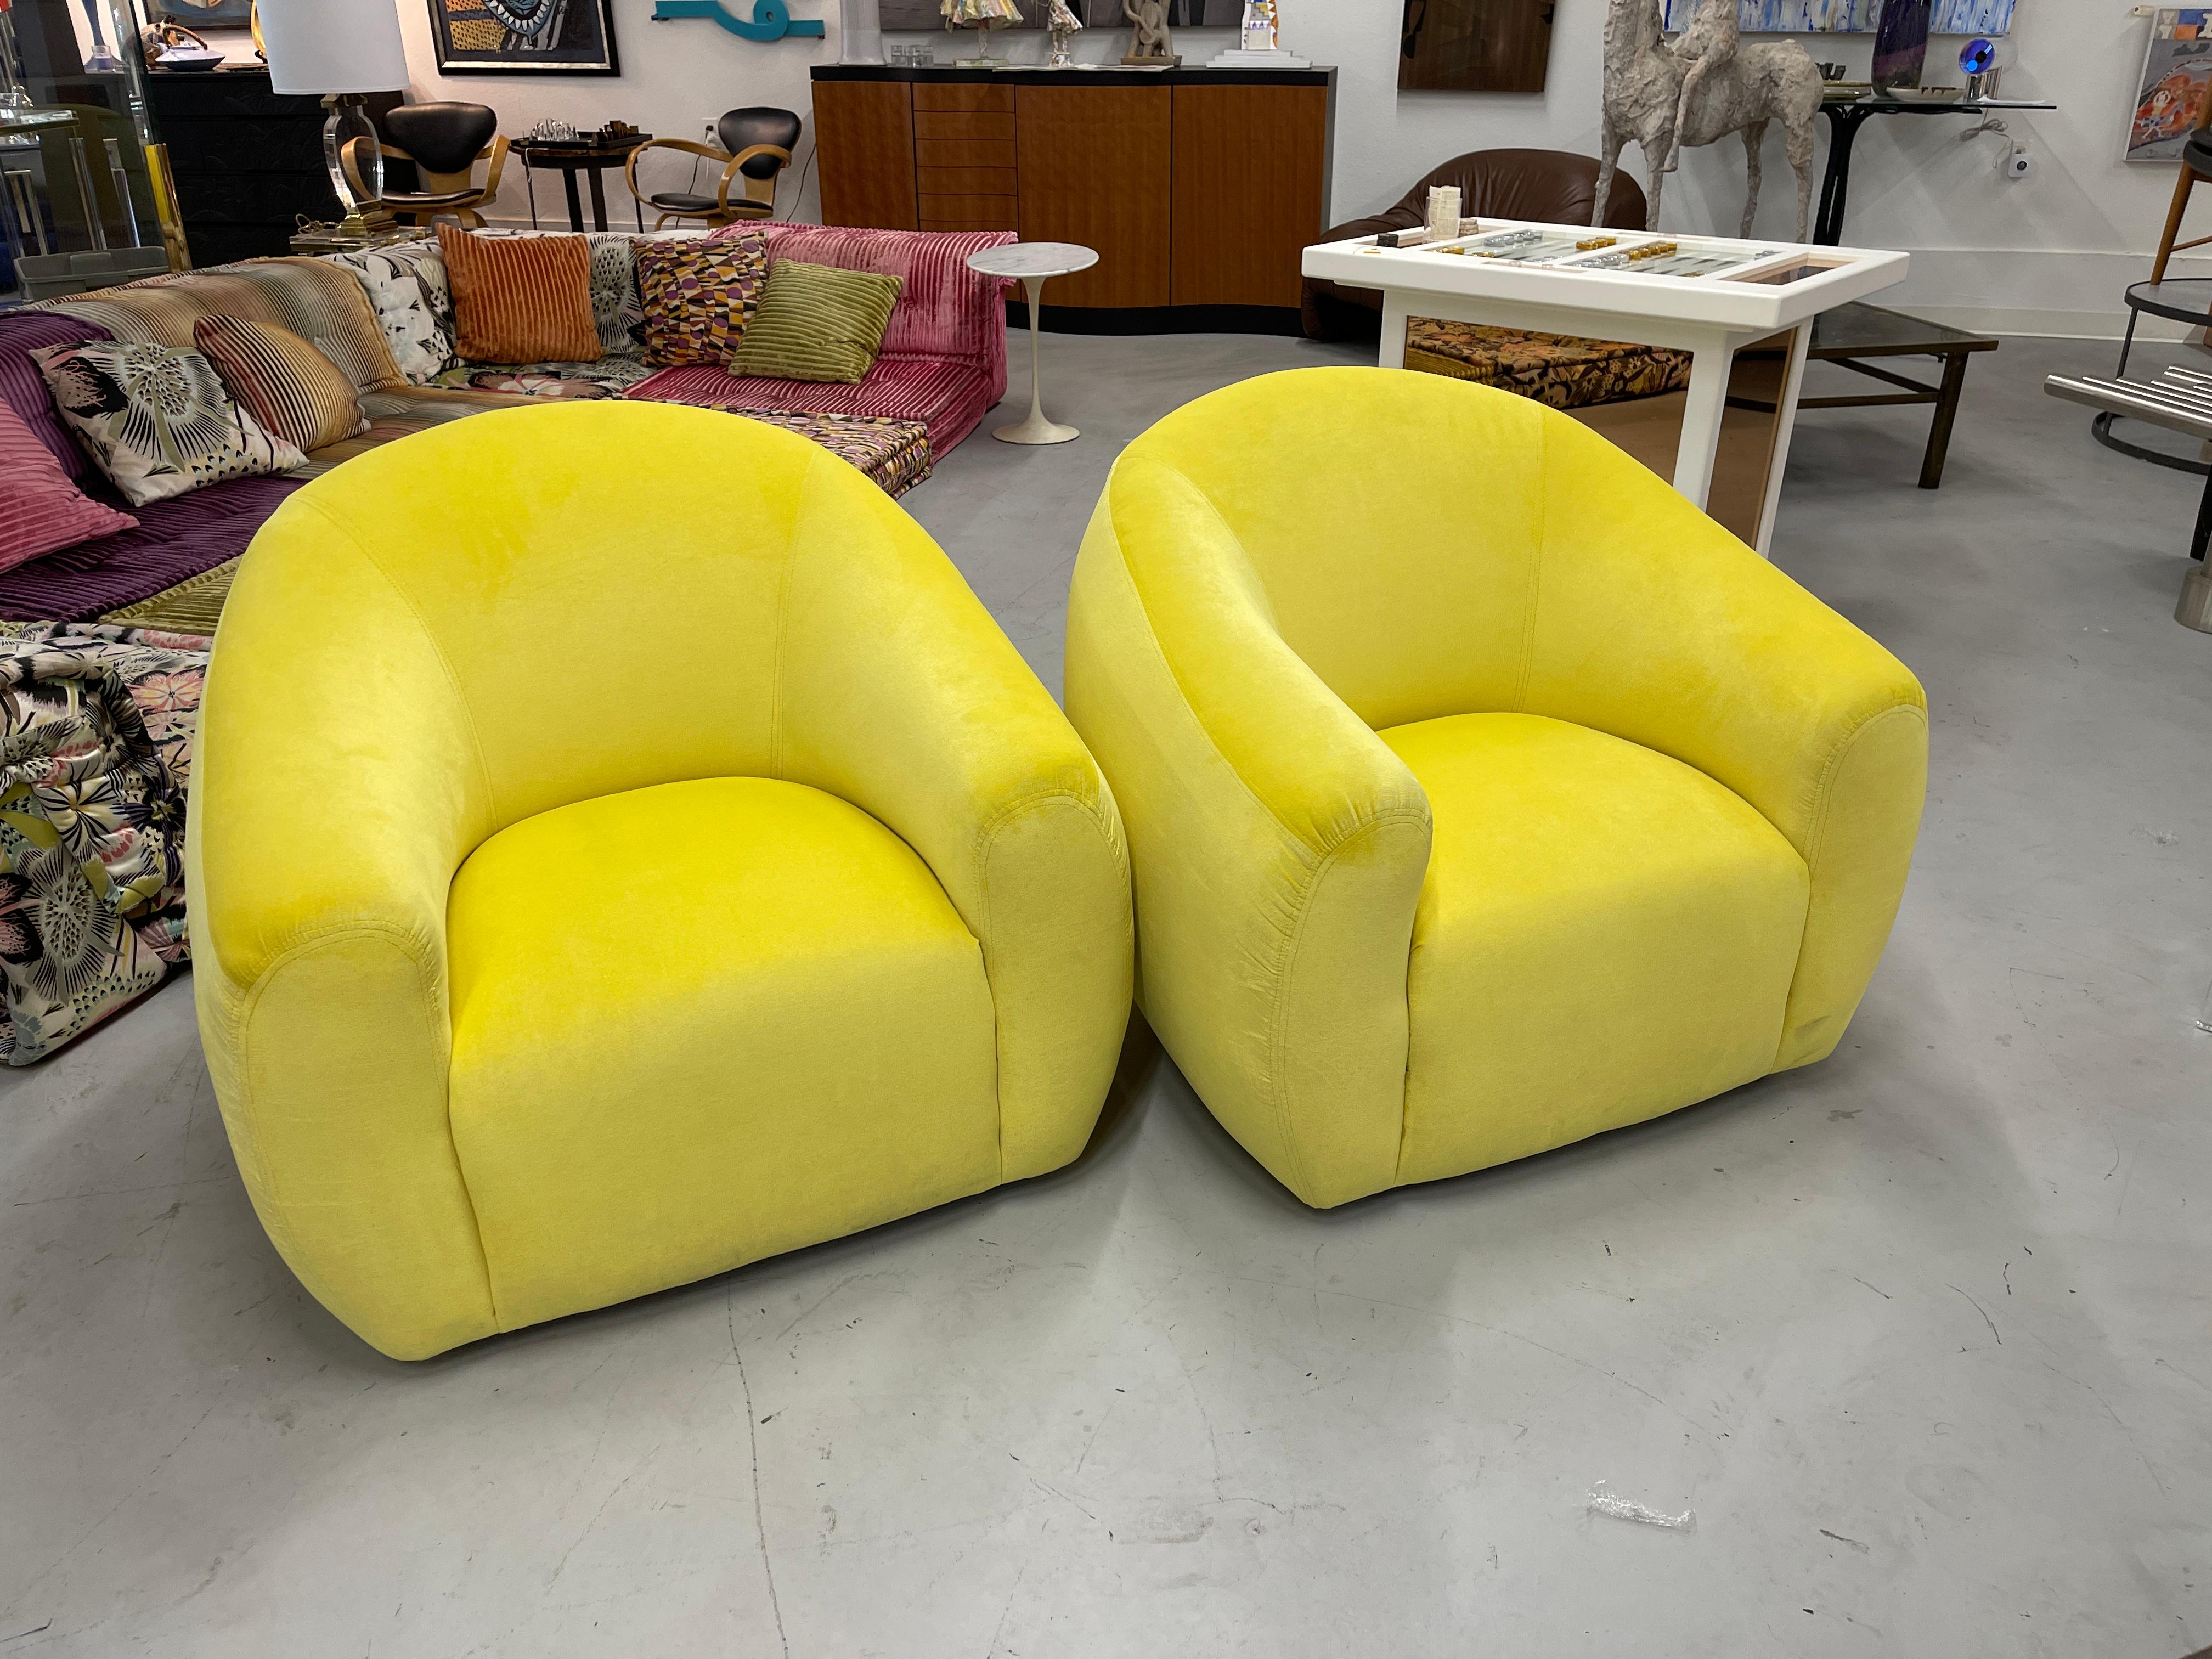 American A Rudin Swivel Chairs in Limon Kravet Fabric